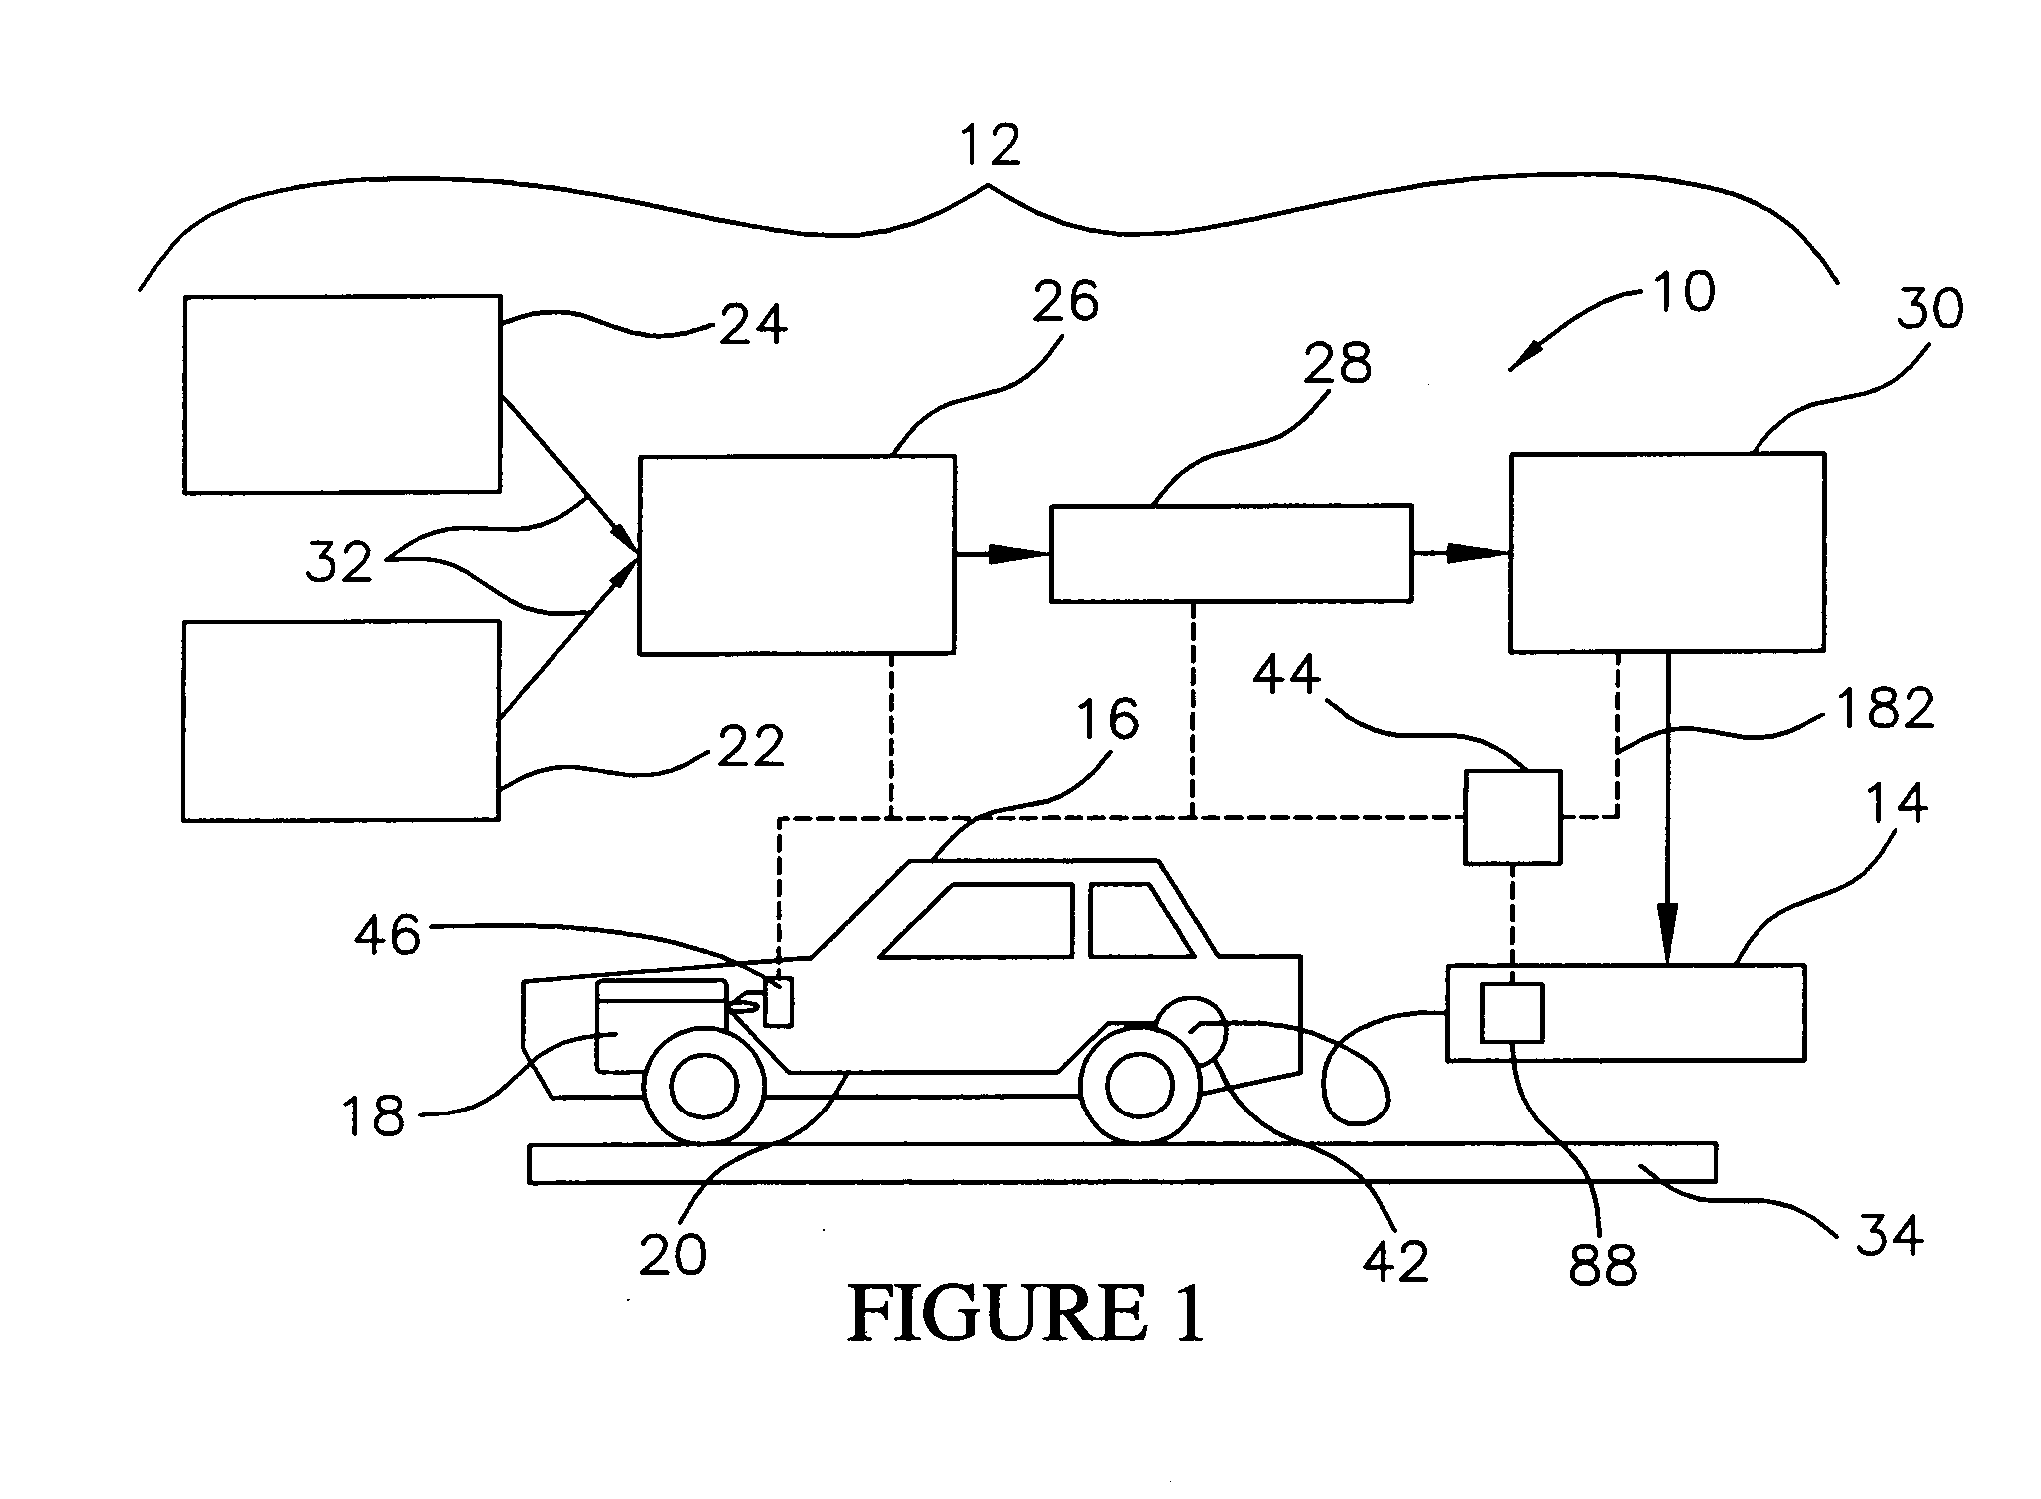 System and method for producing, dispensing, using and monitoring a hydrogen enriched fuel